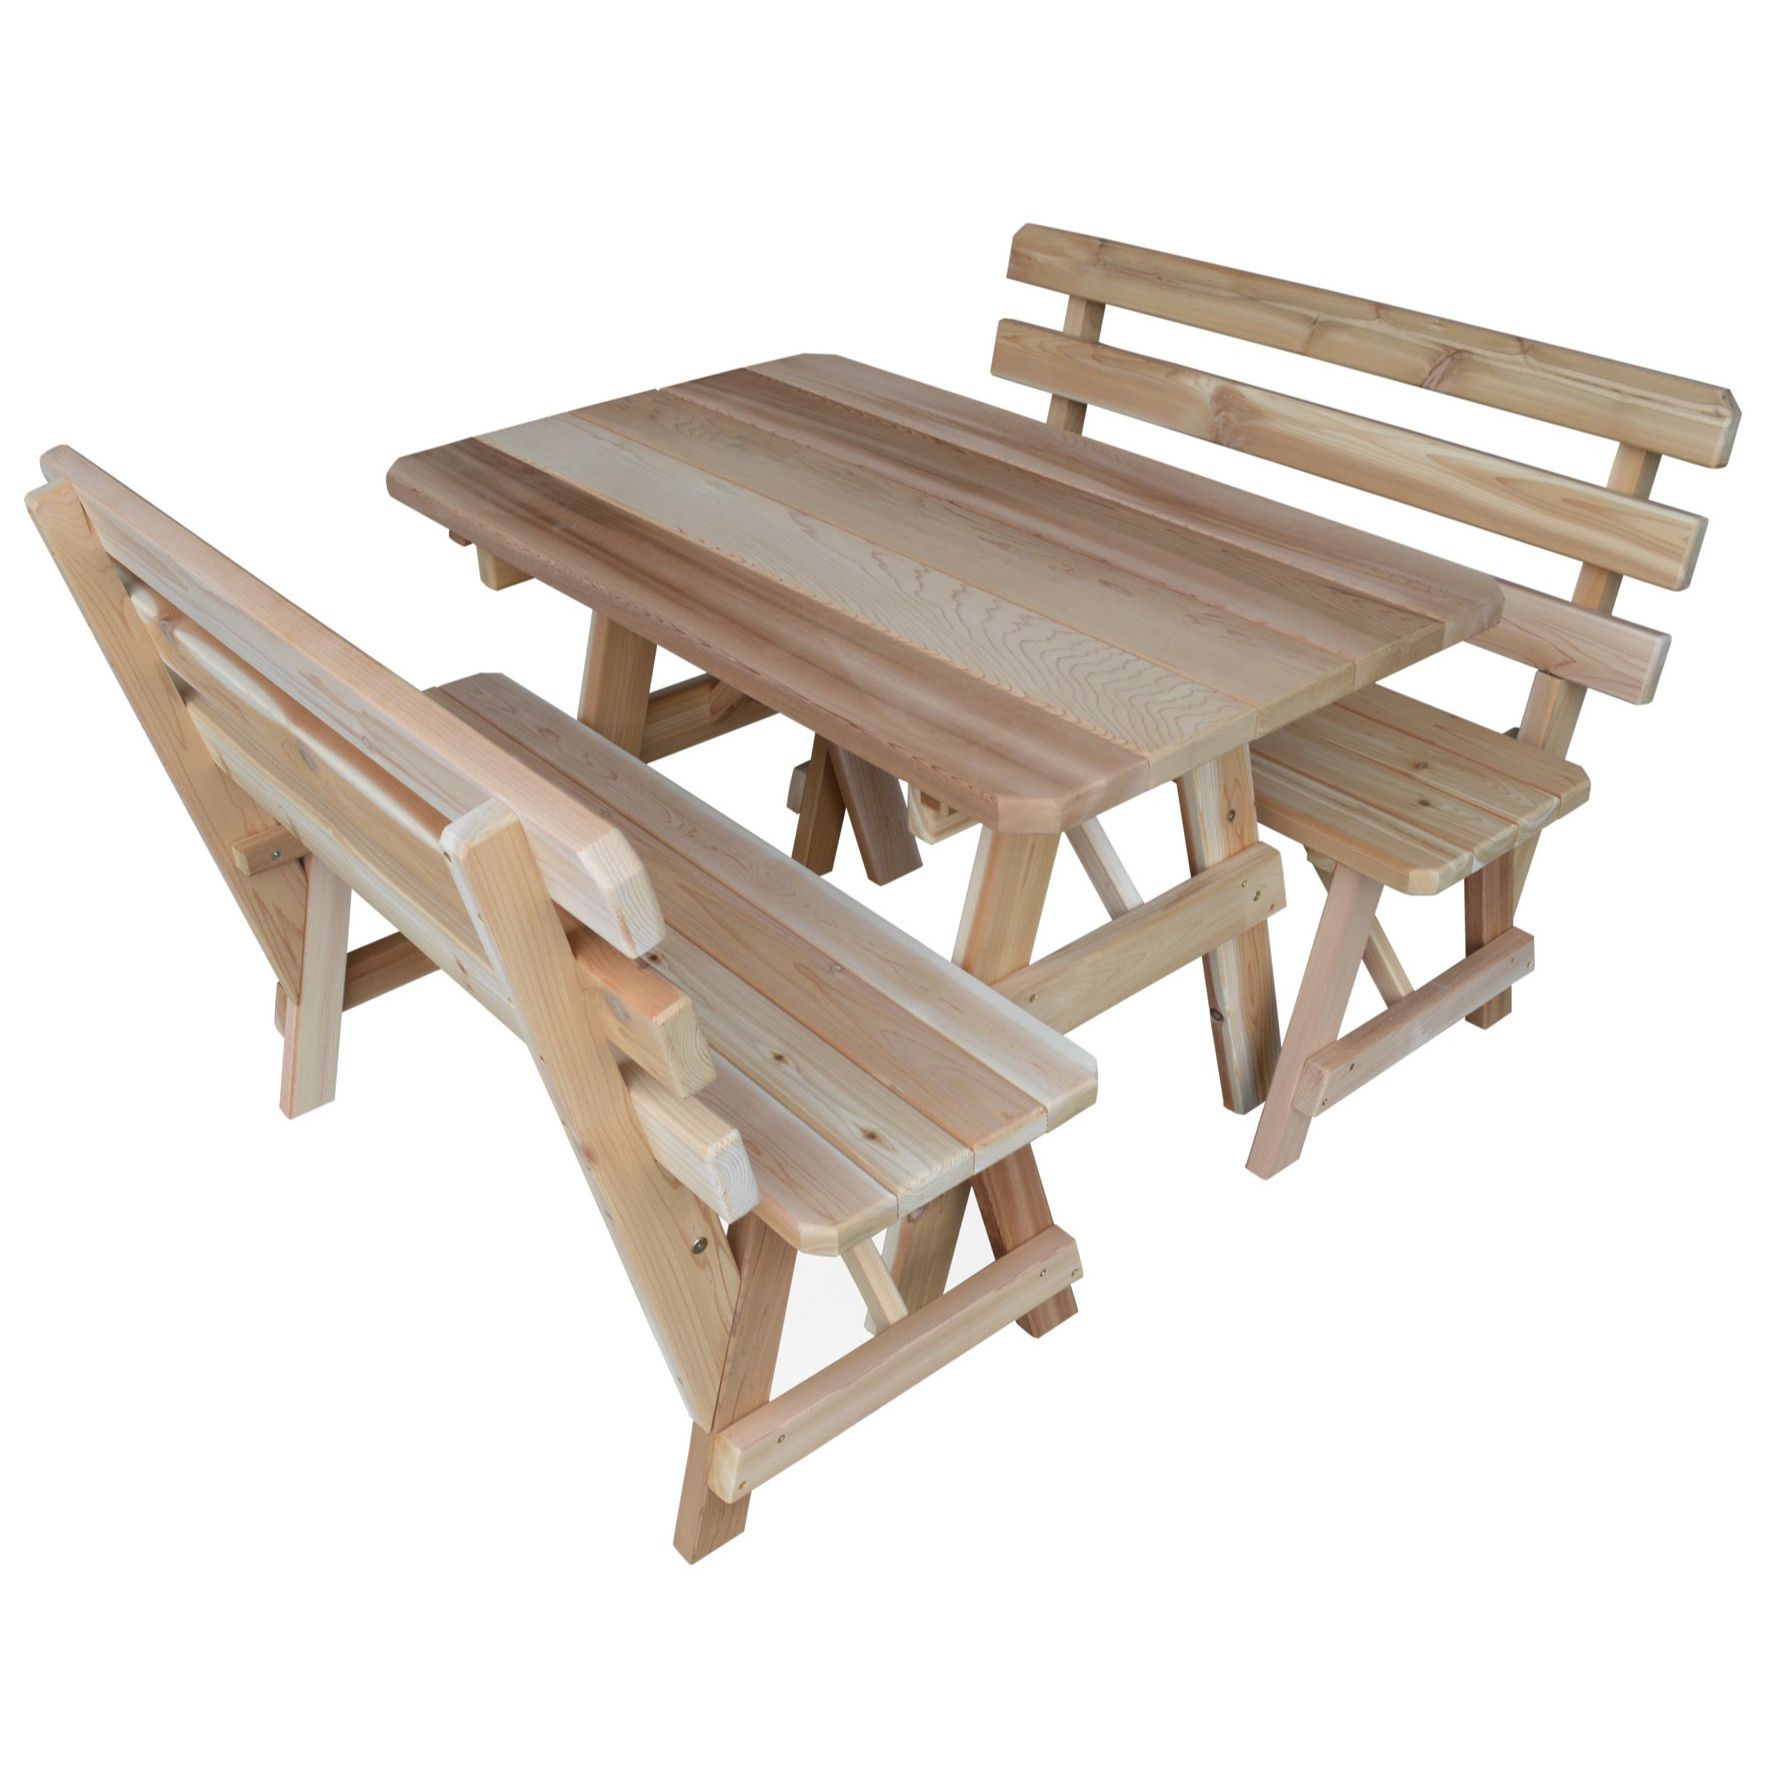 Cedar Picnic Table with Backed Benches